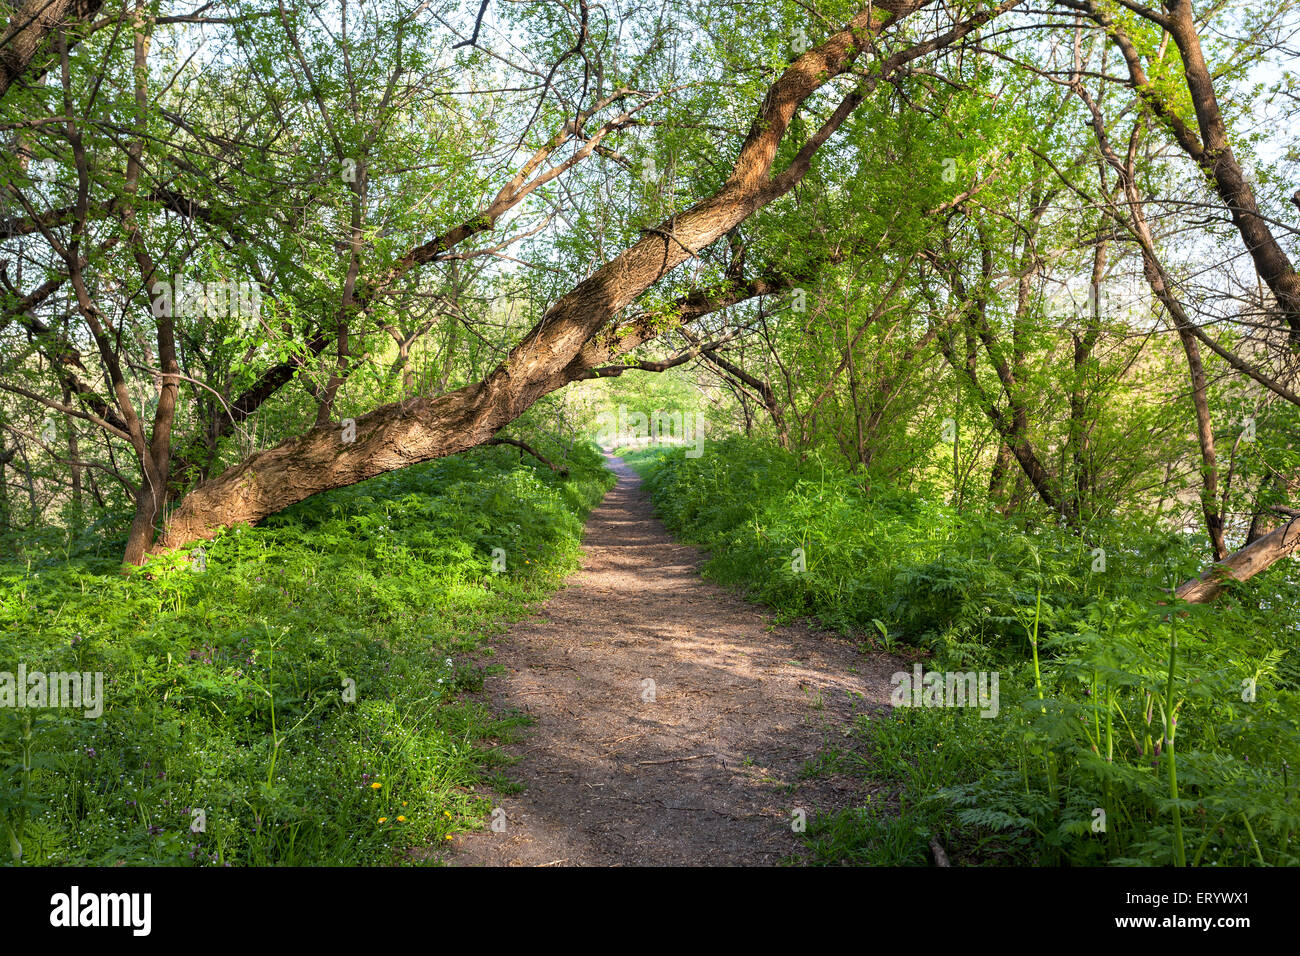 Spring sunset in beautiful magic forest with green plants, trees and trail. Landscape Stock Photo